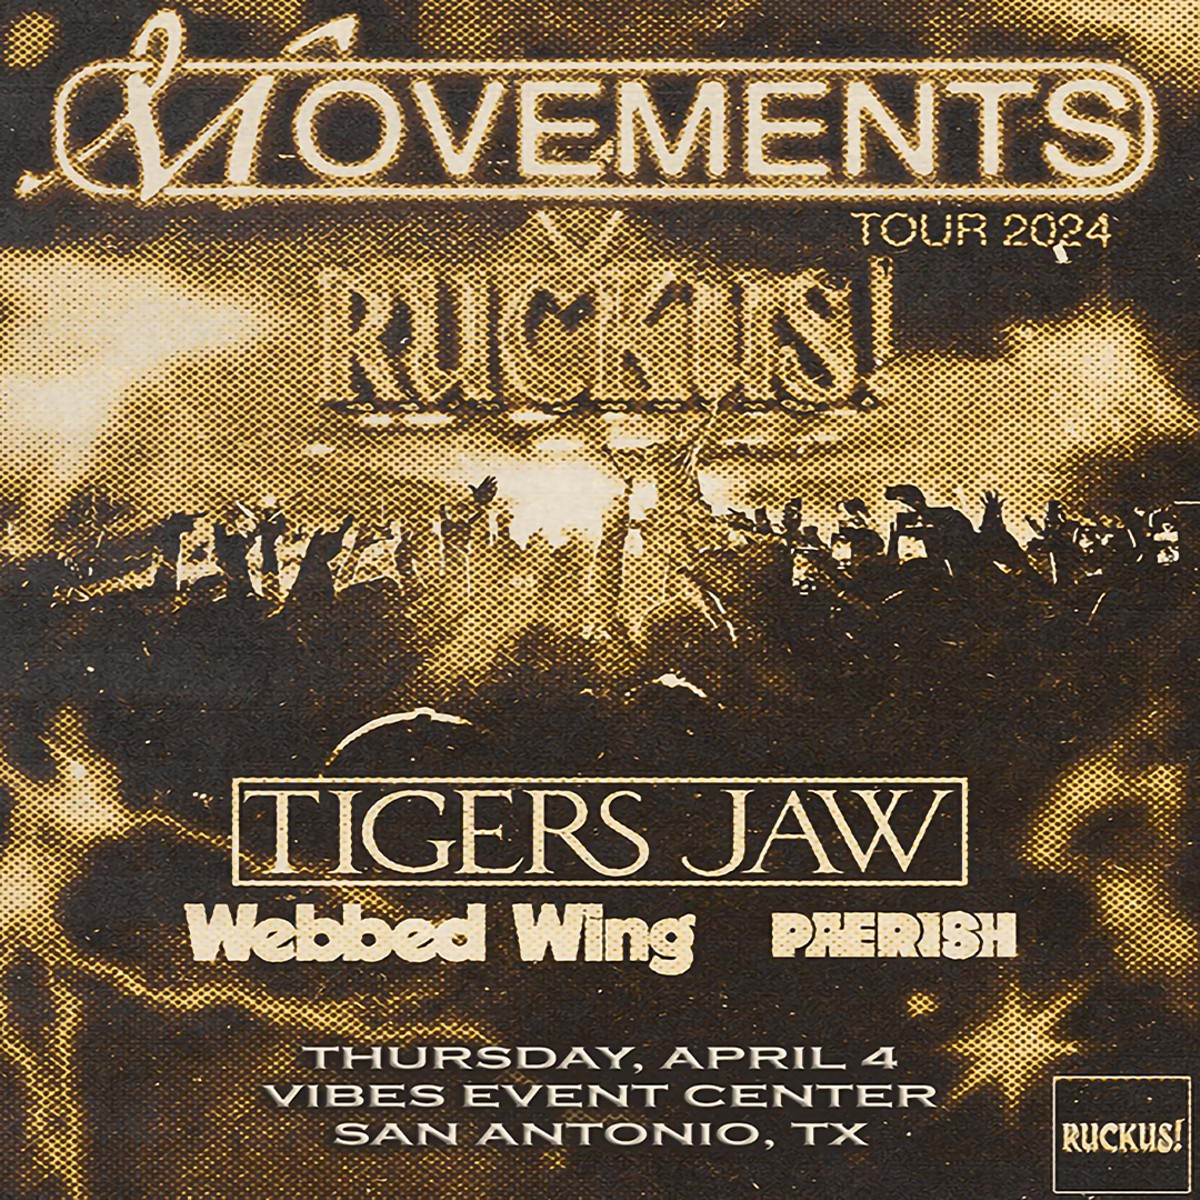 Twin Productions Presents Movements RUCKUS! TOUR 2024 at Vibes Event